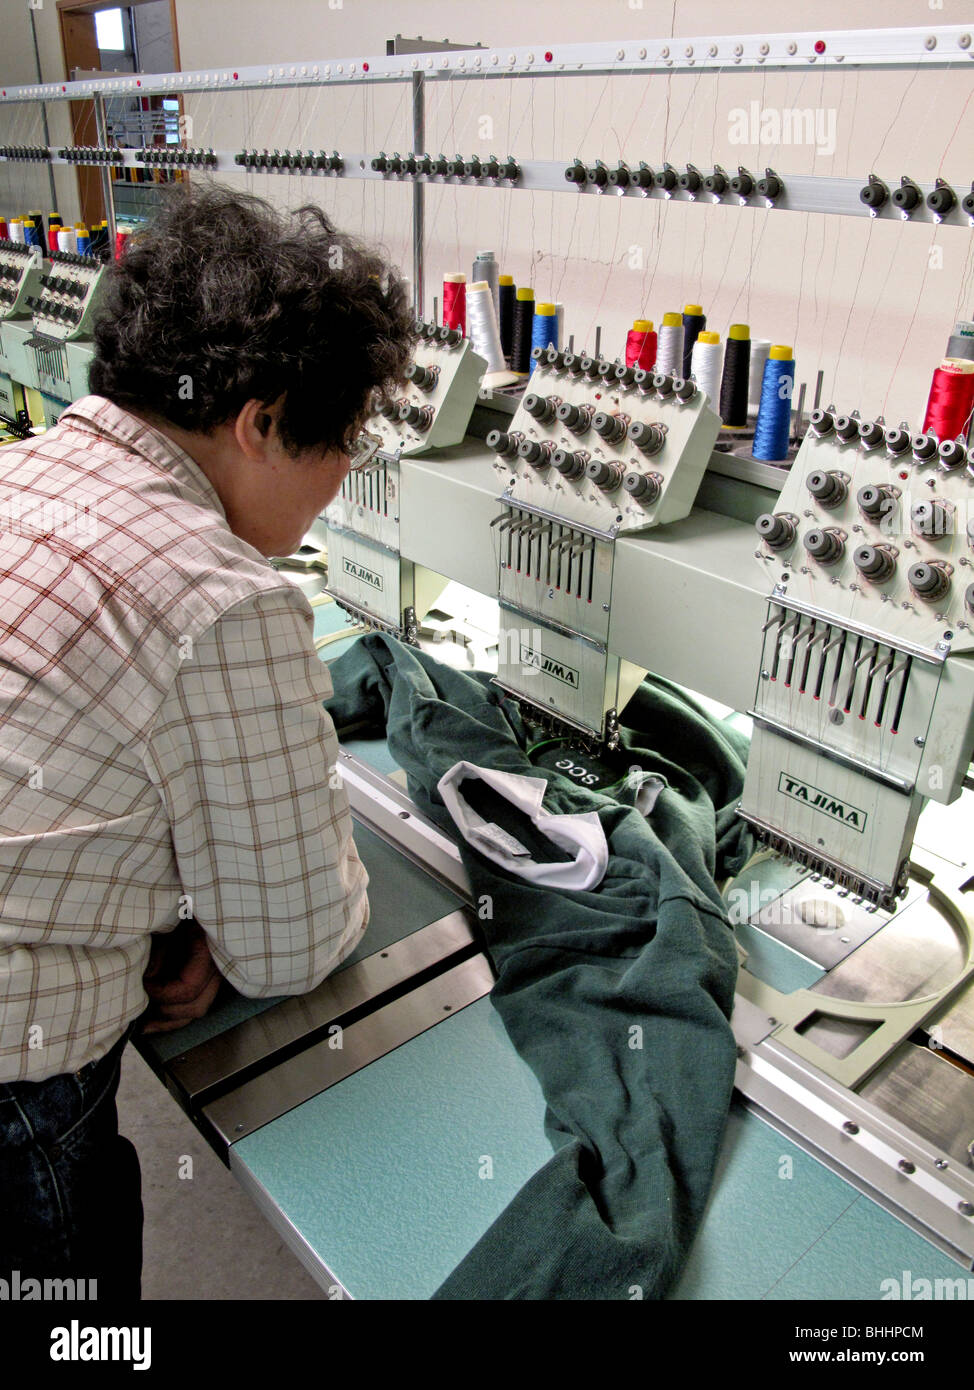 A computer-programmed automatic embroidery machine stitches a monogram on a shirt in Laguna Niguel, CA. Stock Photo